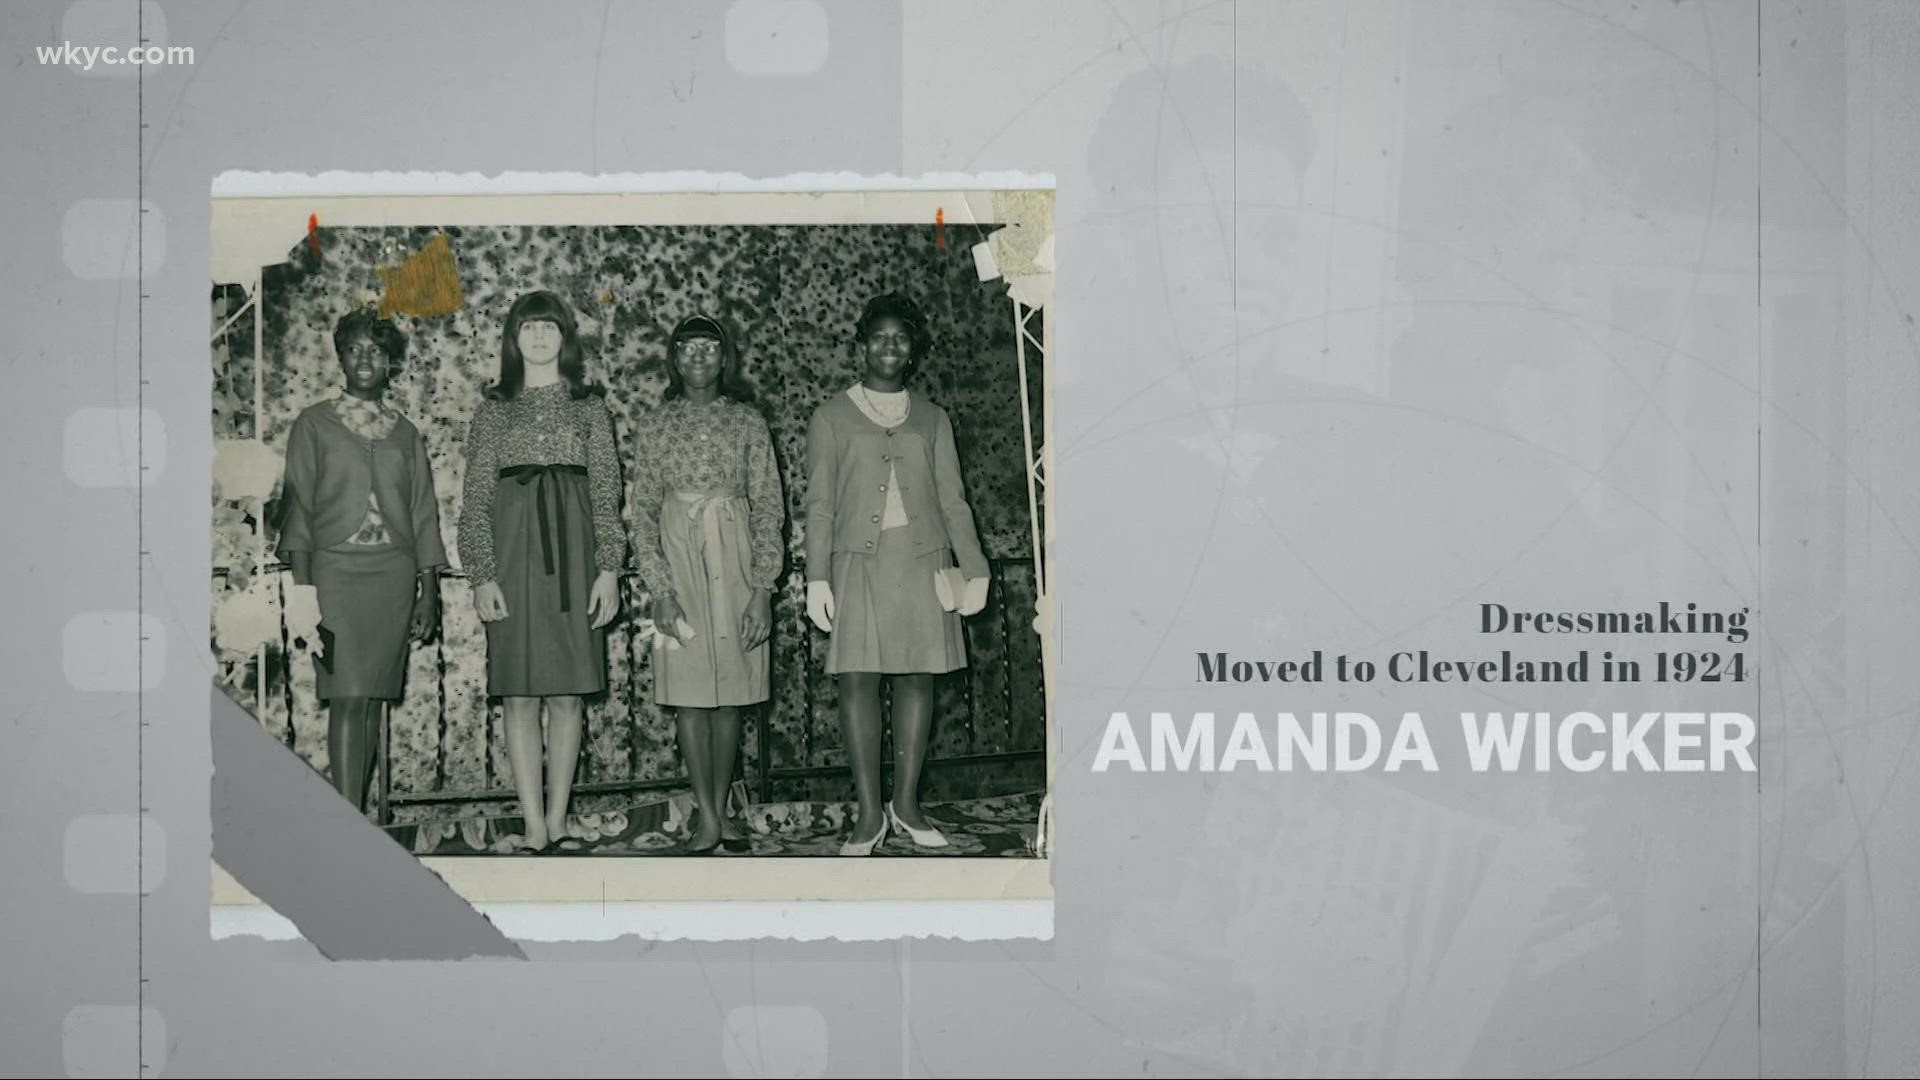 As we continue to celebrate Black History Month in Ohio, we’re shining a light on Amanda Wicker -- a female entrepreneur who made an impact in Cleveland.